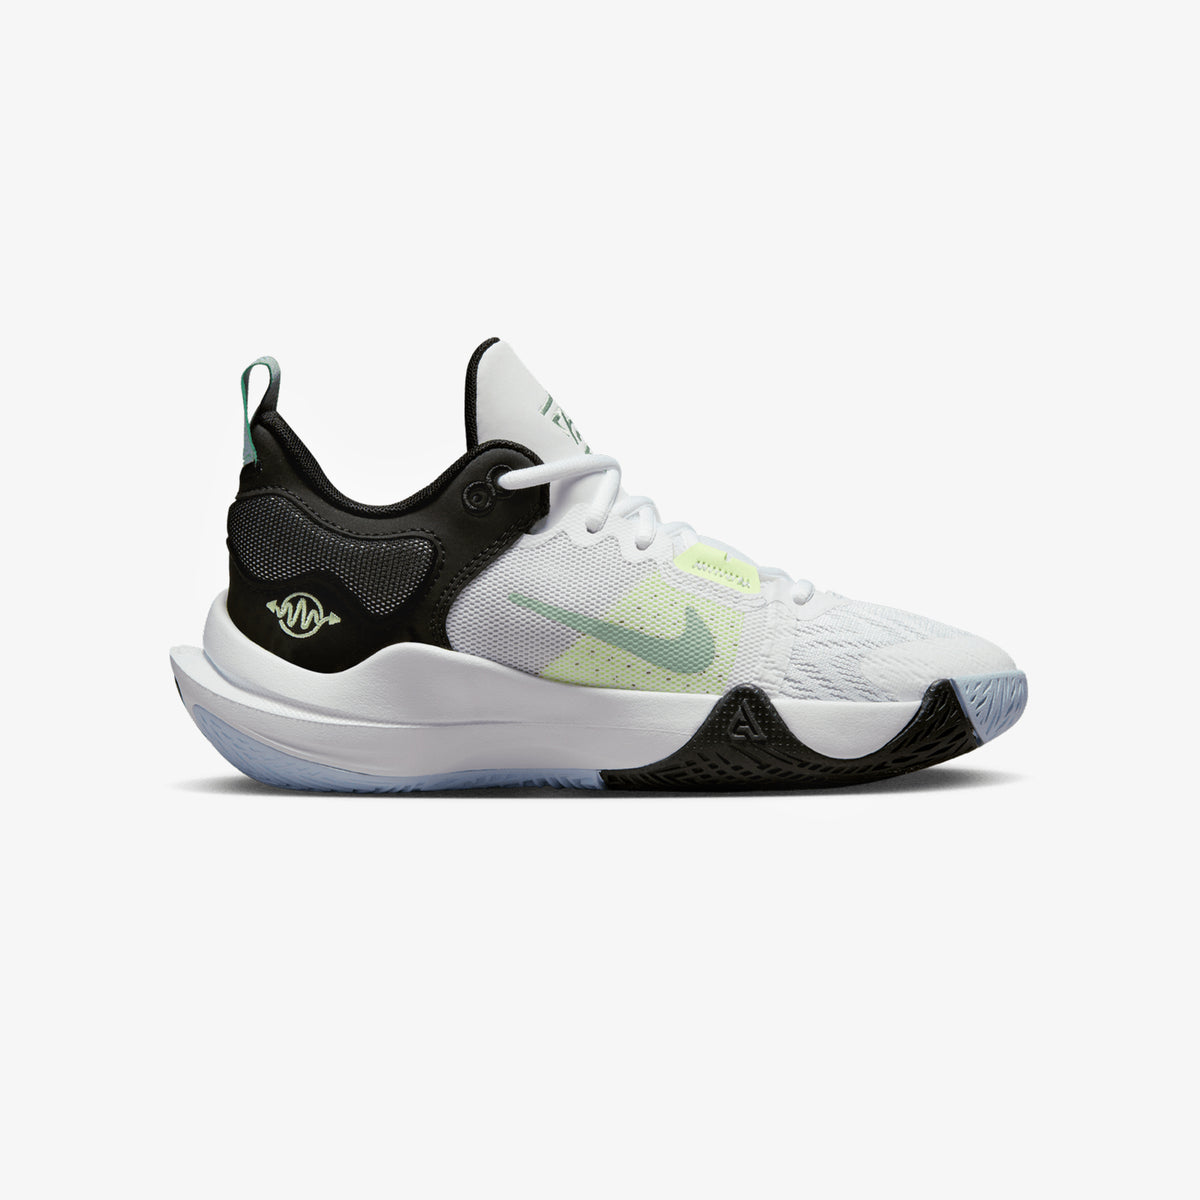 Giannis Immortality 2 (GS) - White/Barely Volt